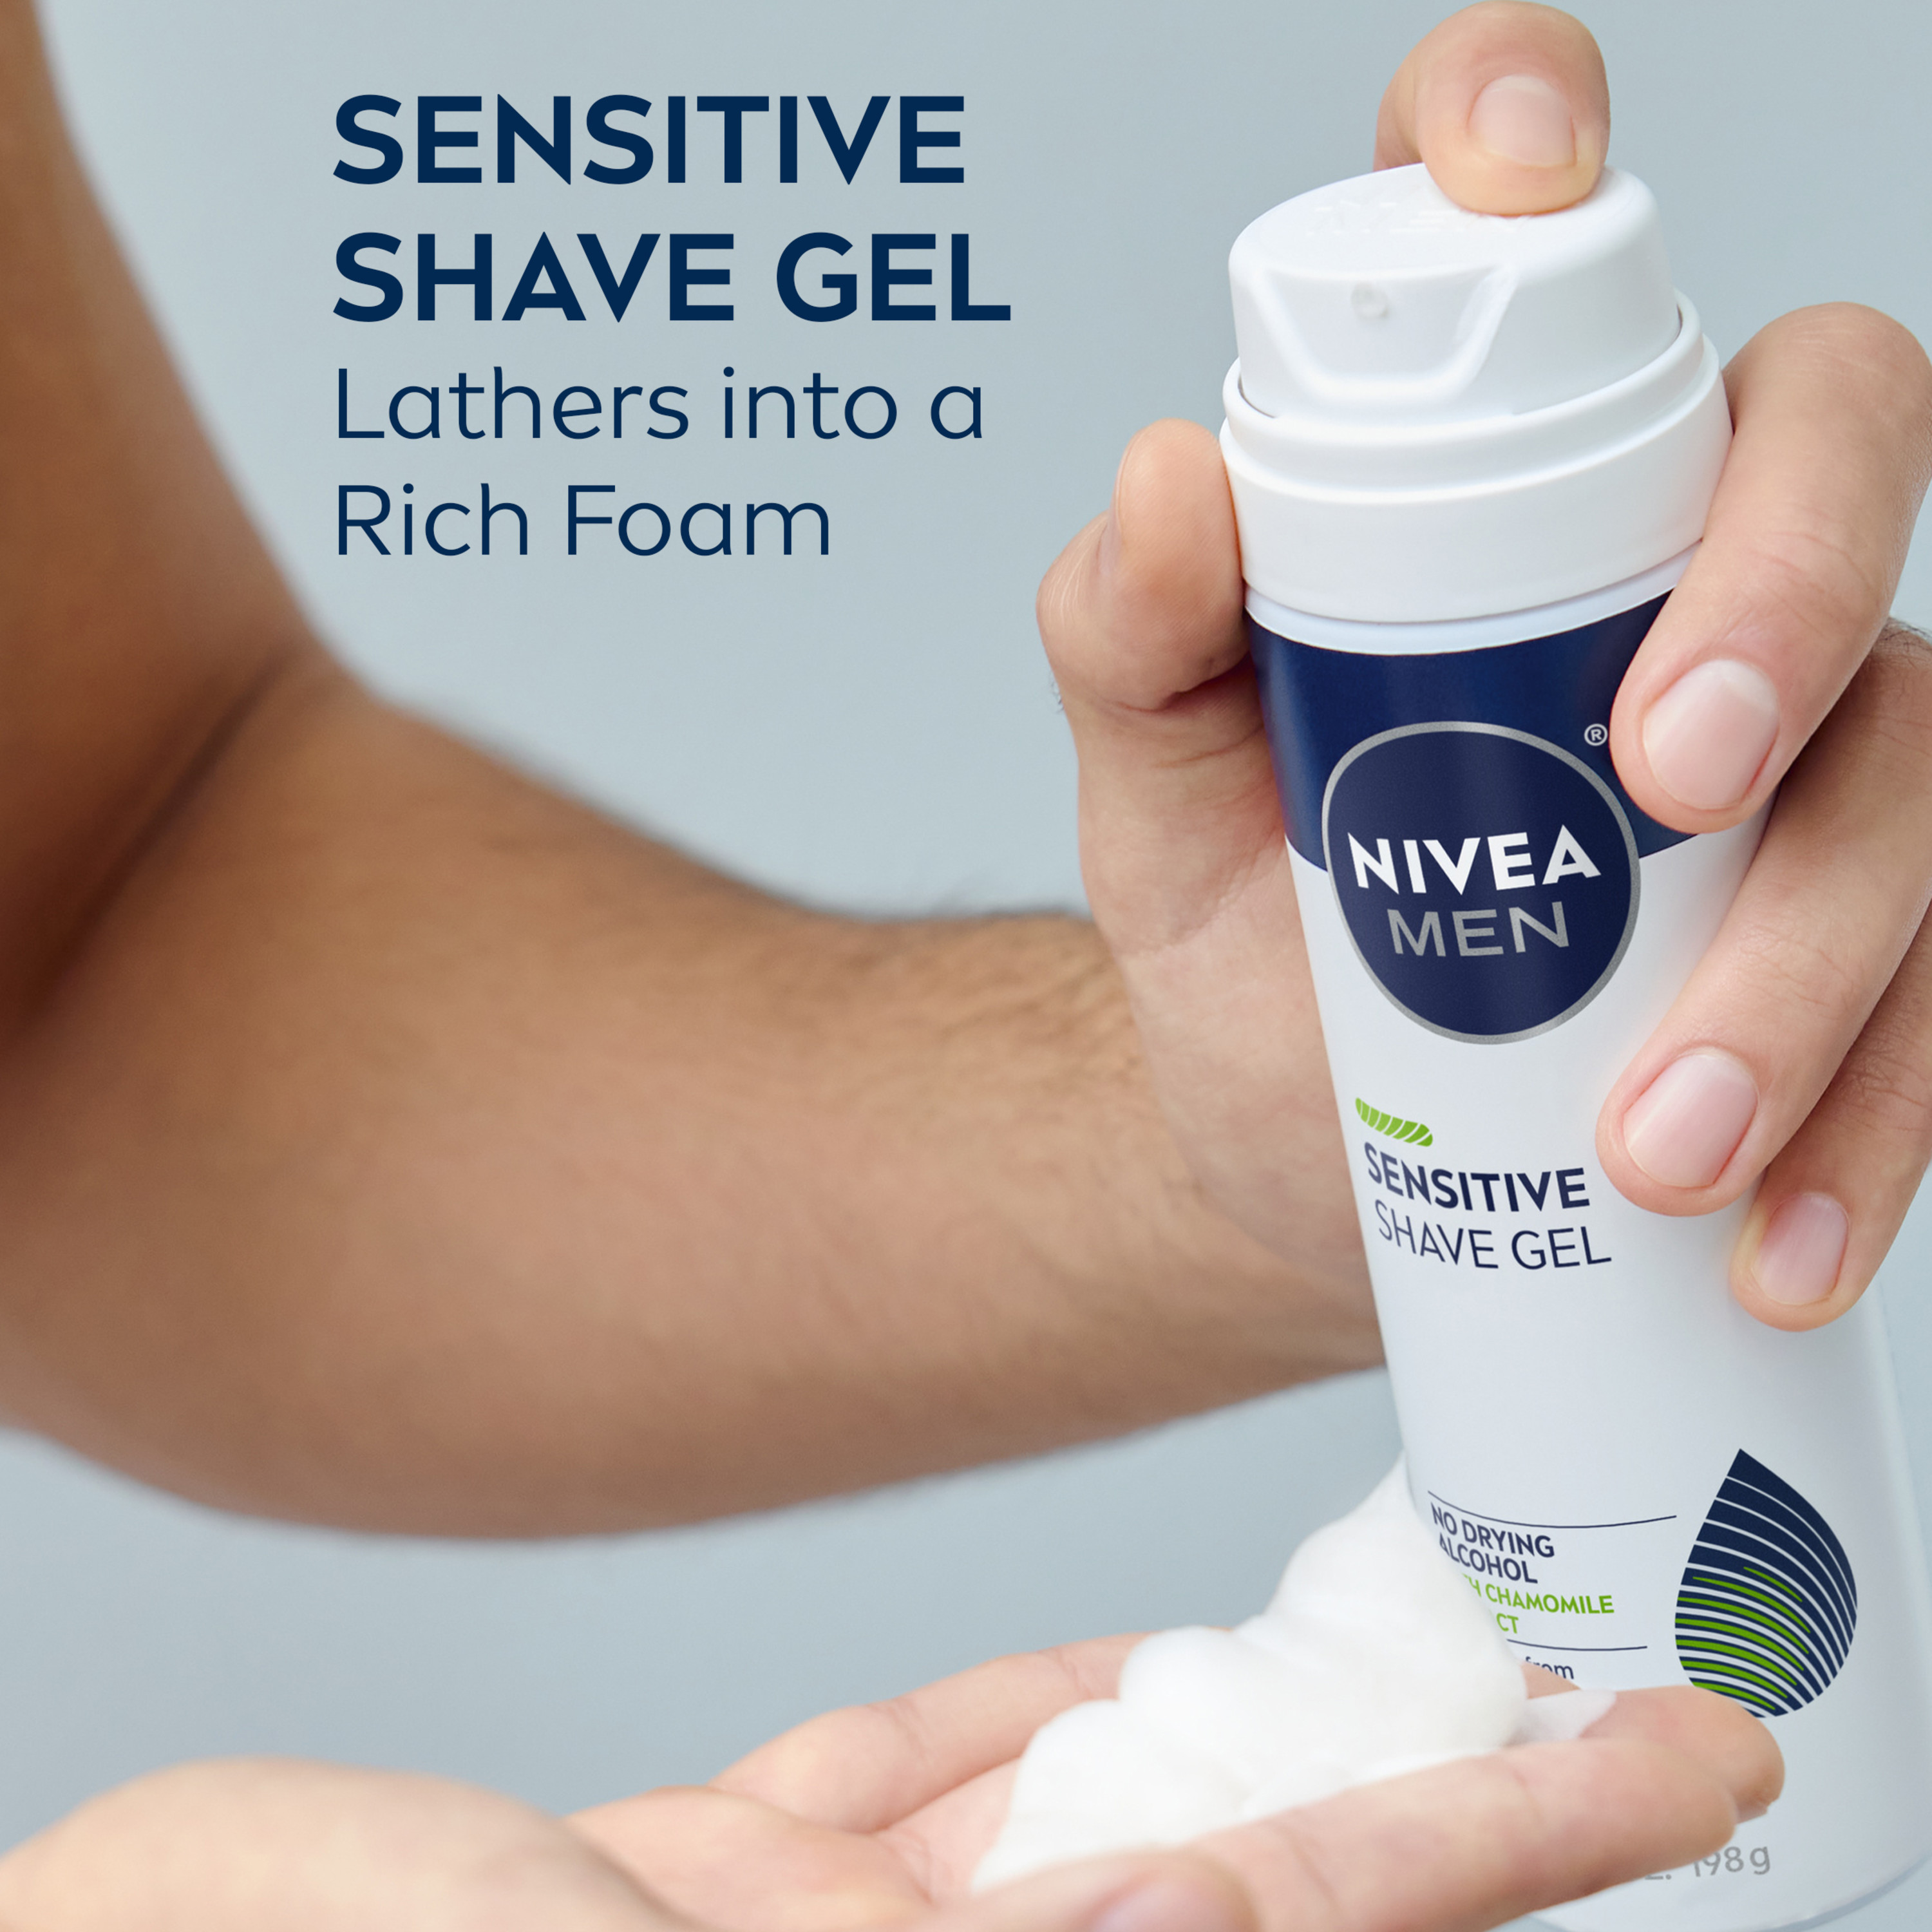 NIVEA MEN Sensitive Shave Gel with Vitamin E, Soothing Chamomile and Witch Hazel Extracts, 7 oz Can - image 4 of 13